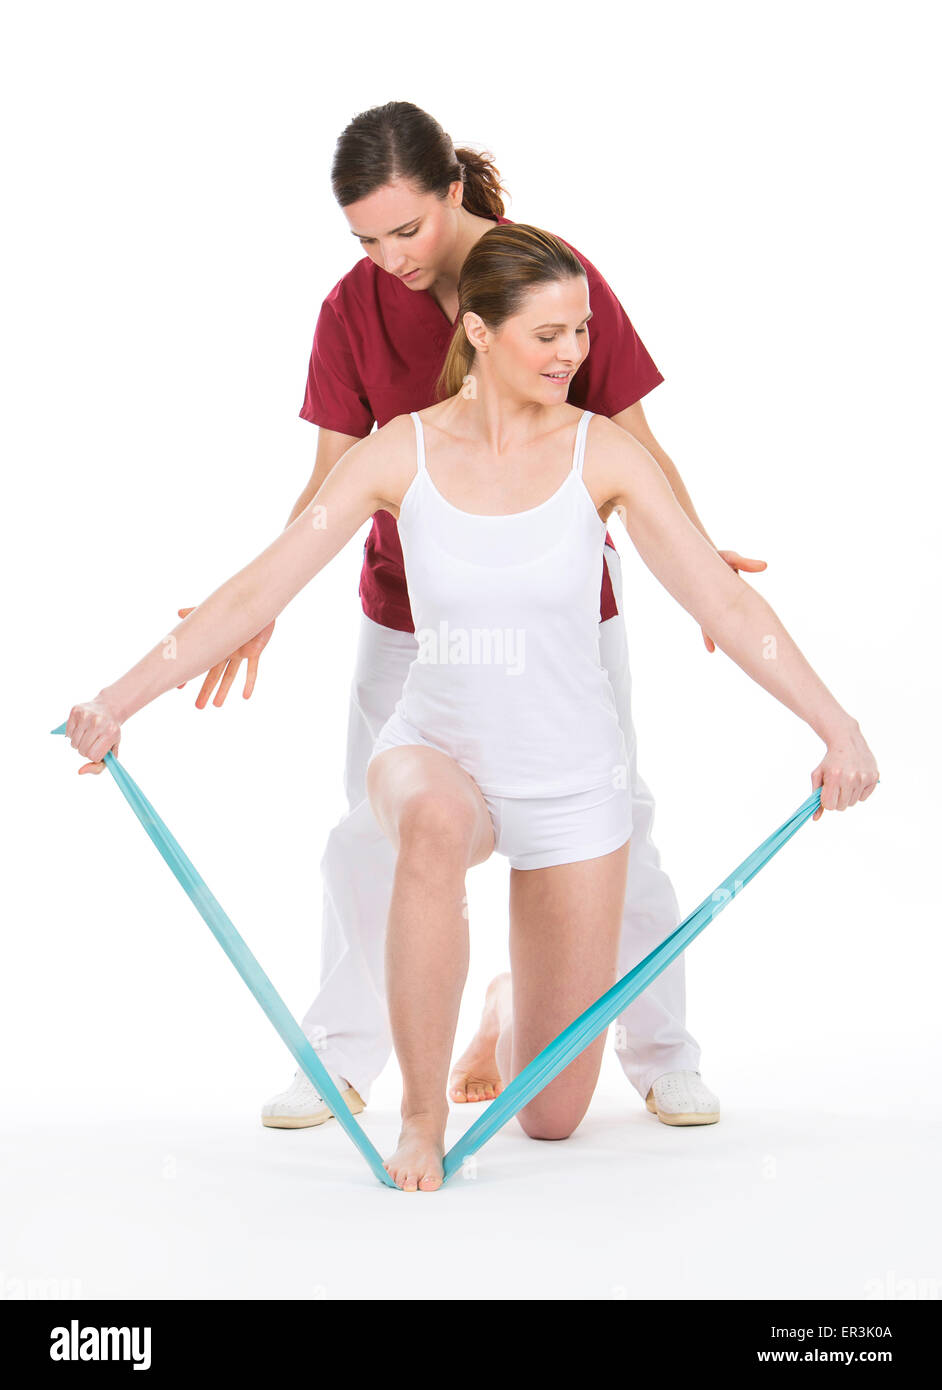 woman with physiotherapist reinforcing arms with rubber bands Stock Photo